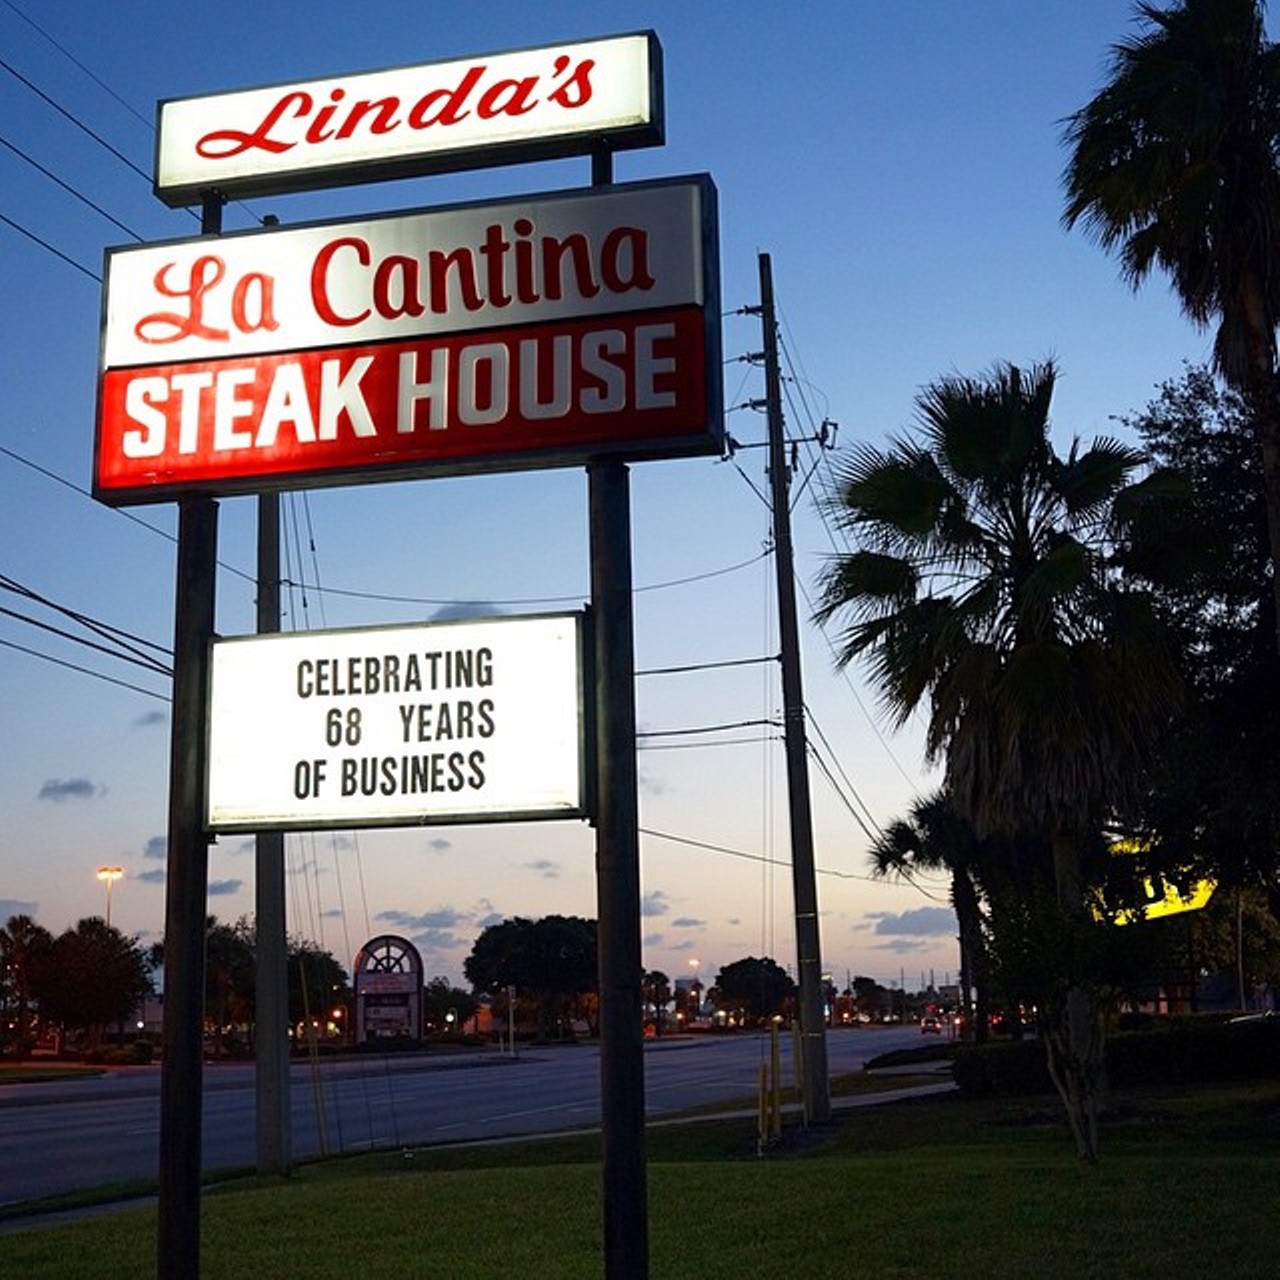 Linda&#146;s La Cantina
No matter how you slice it, Linda&#146;s La Cantina serves a superb steak and has been doing so for more than a half-century. Sit in the Fire Fountain Lounge sipping a grasshopper while you&#146;re waiting for your checked-tablecloth digs in the dining room &#150; and keep in mind that on most nights, reservations are recommended. All steaks are cut in-house, including the monster 2-pound T-bone. 
4721 E. Colonial Drive, 407-894-4491; $$$
Photo via olivierlacan/Instagram